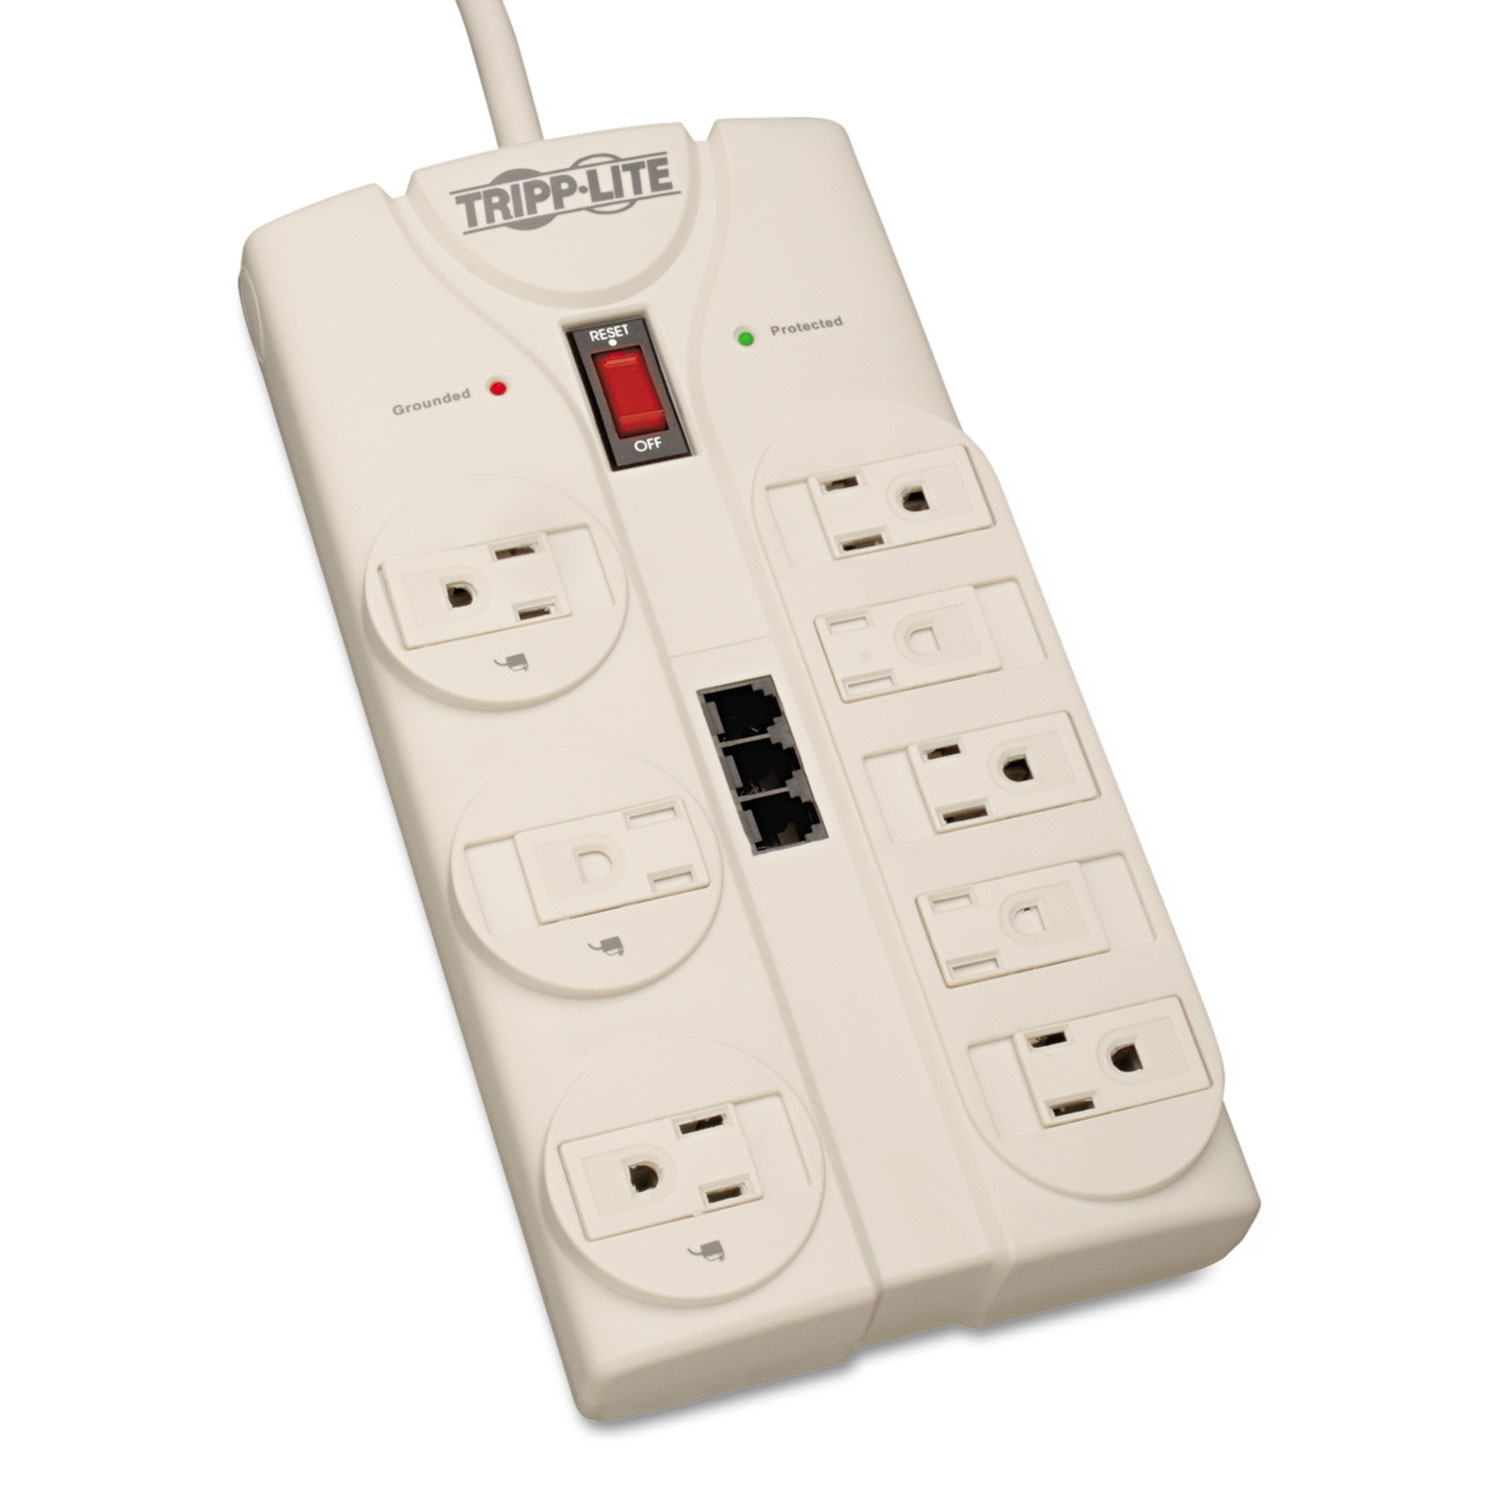 Protect It! Computer Surge Protector, 8 Outlets, 8 ft. Cord, 2160 J, Light Gray